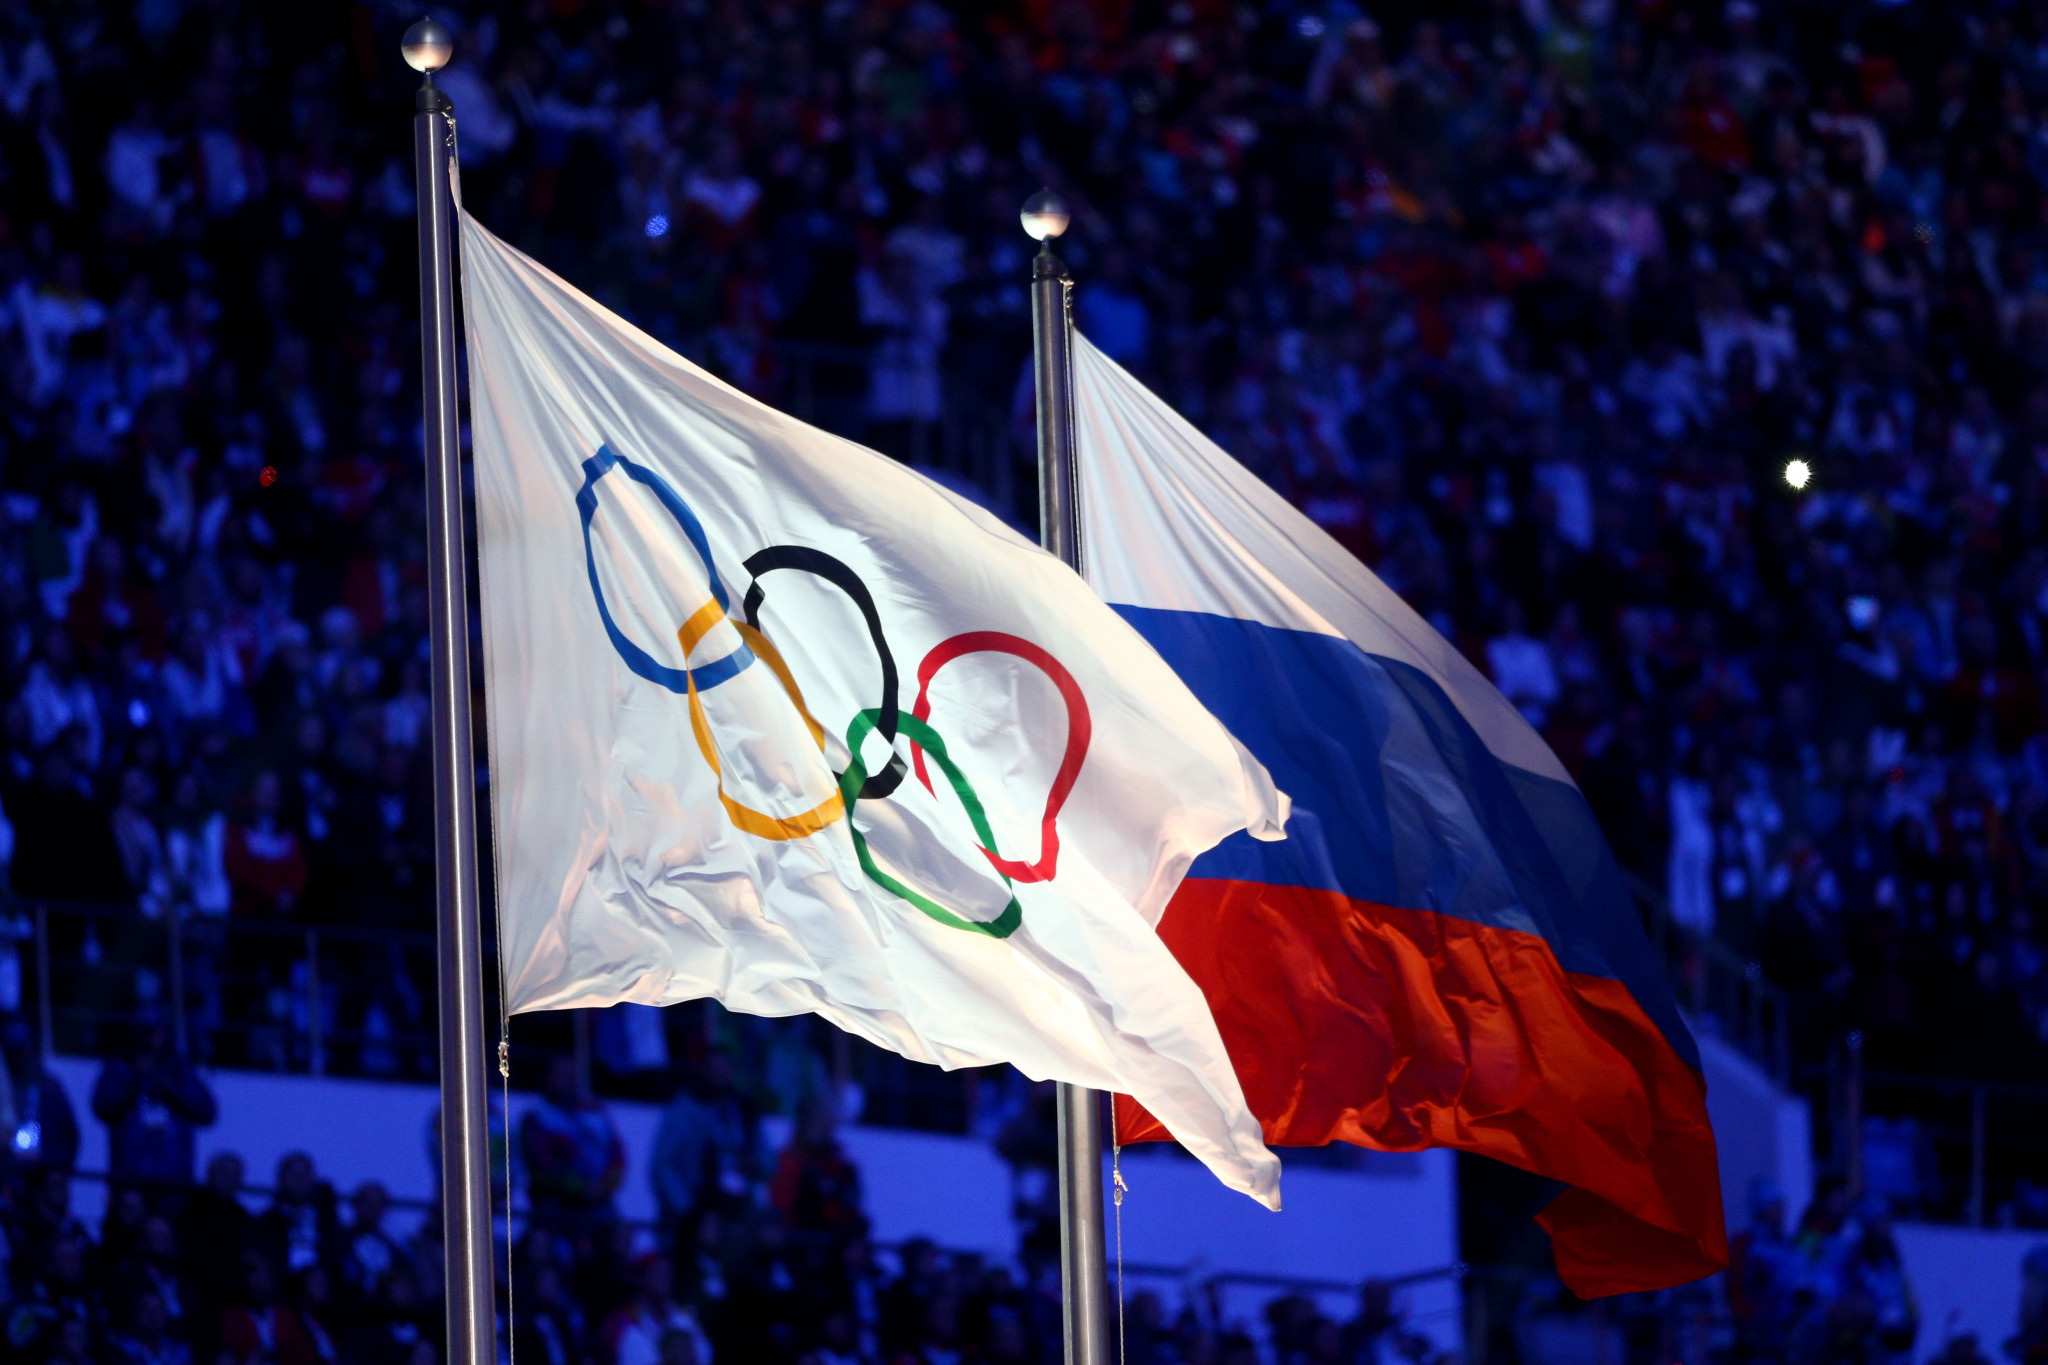 The IOC initially recommended an outright ban on Russia after its invasion of Ukraine, which Peter Ogwang says is 